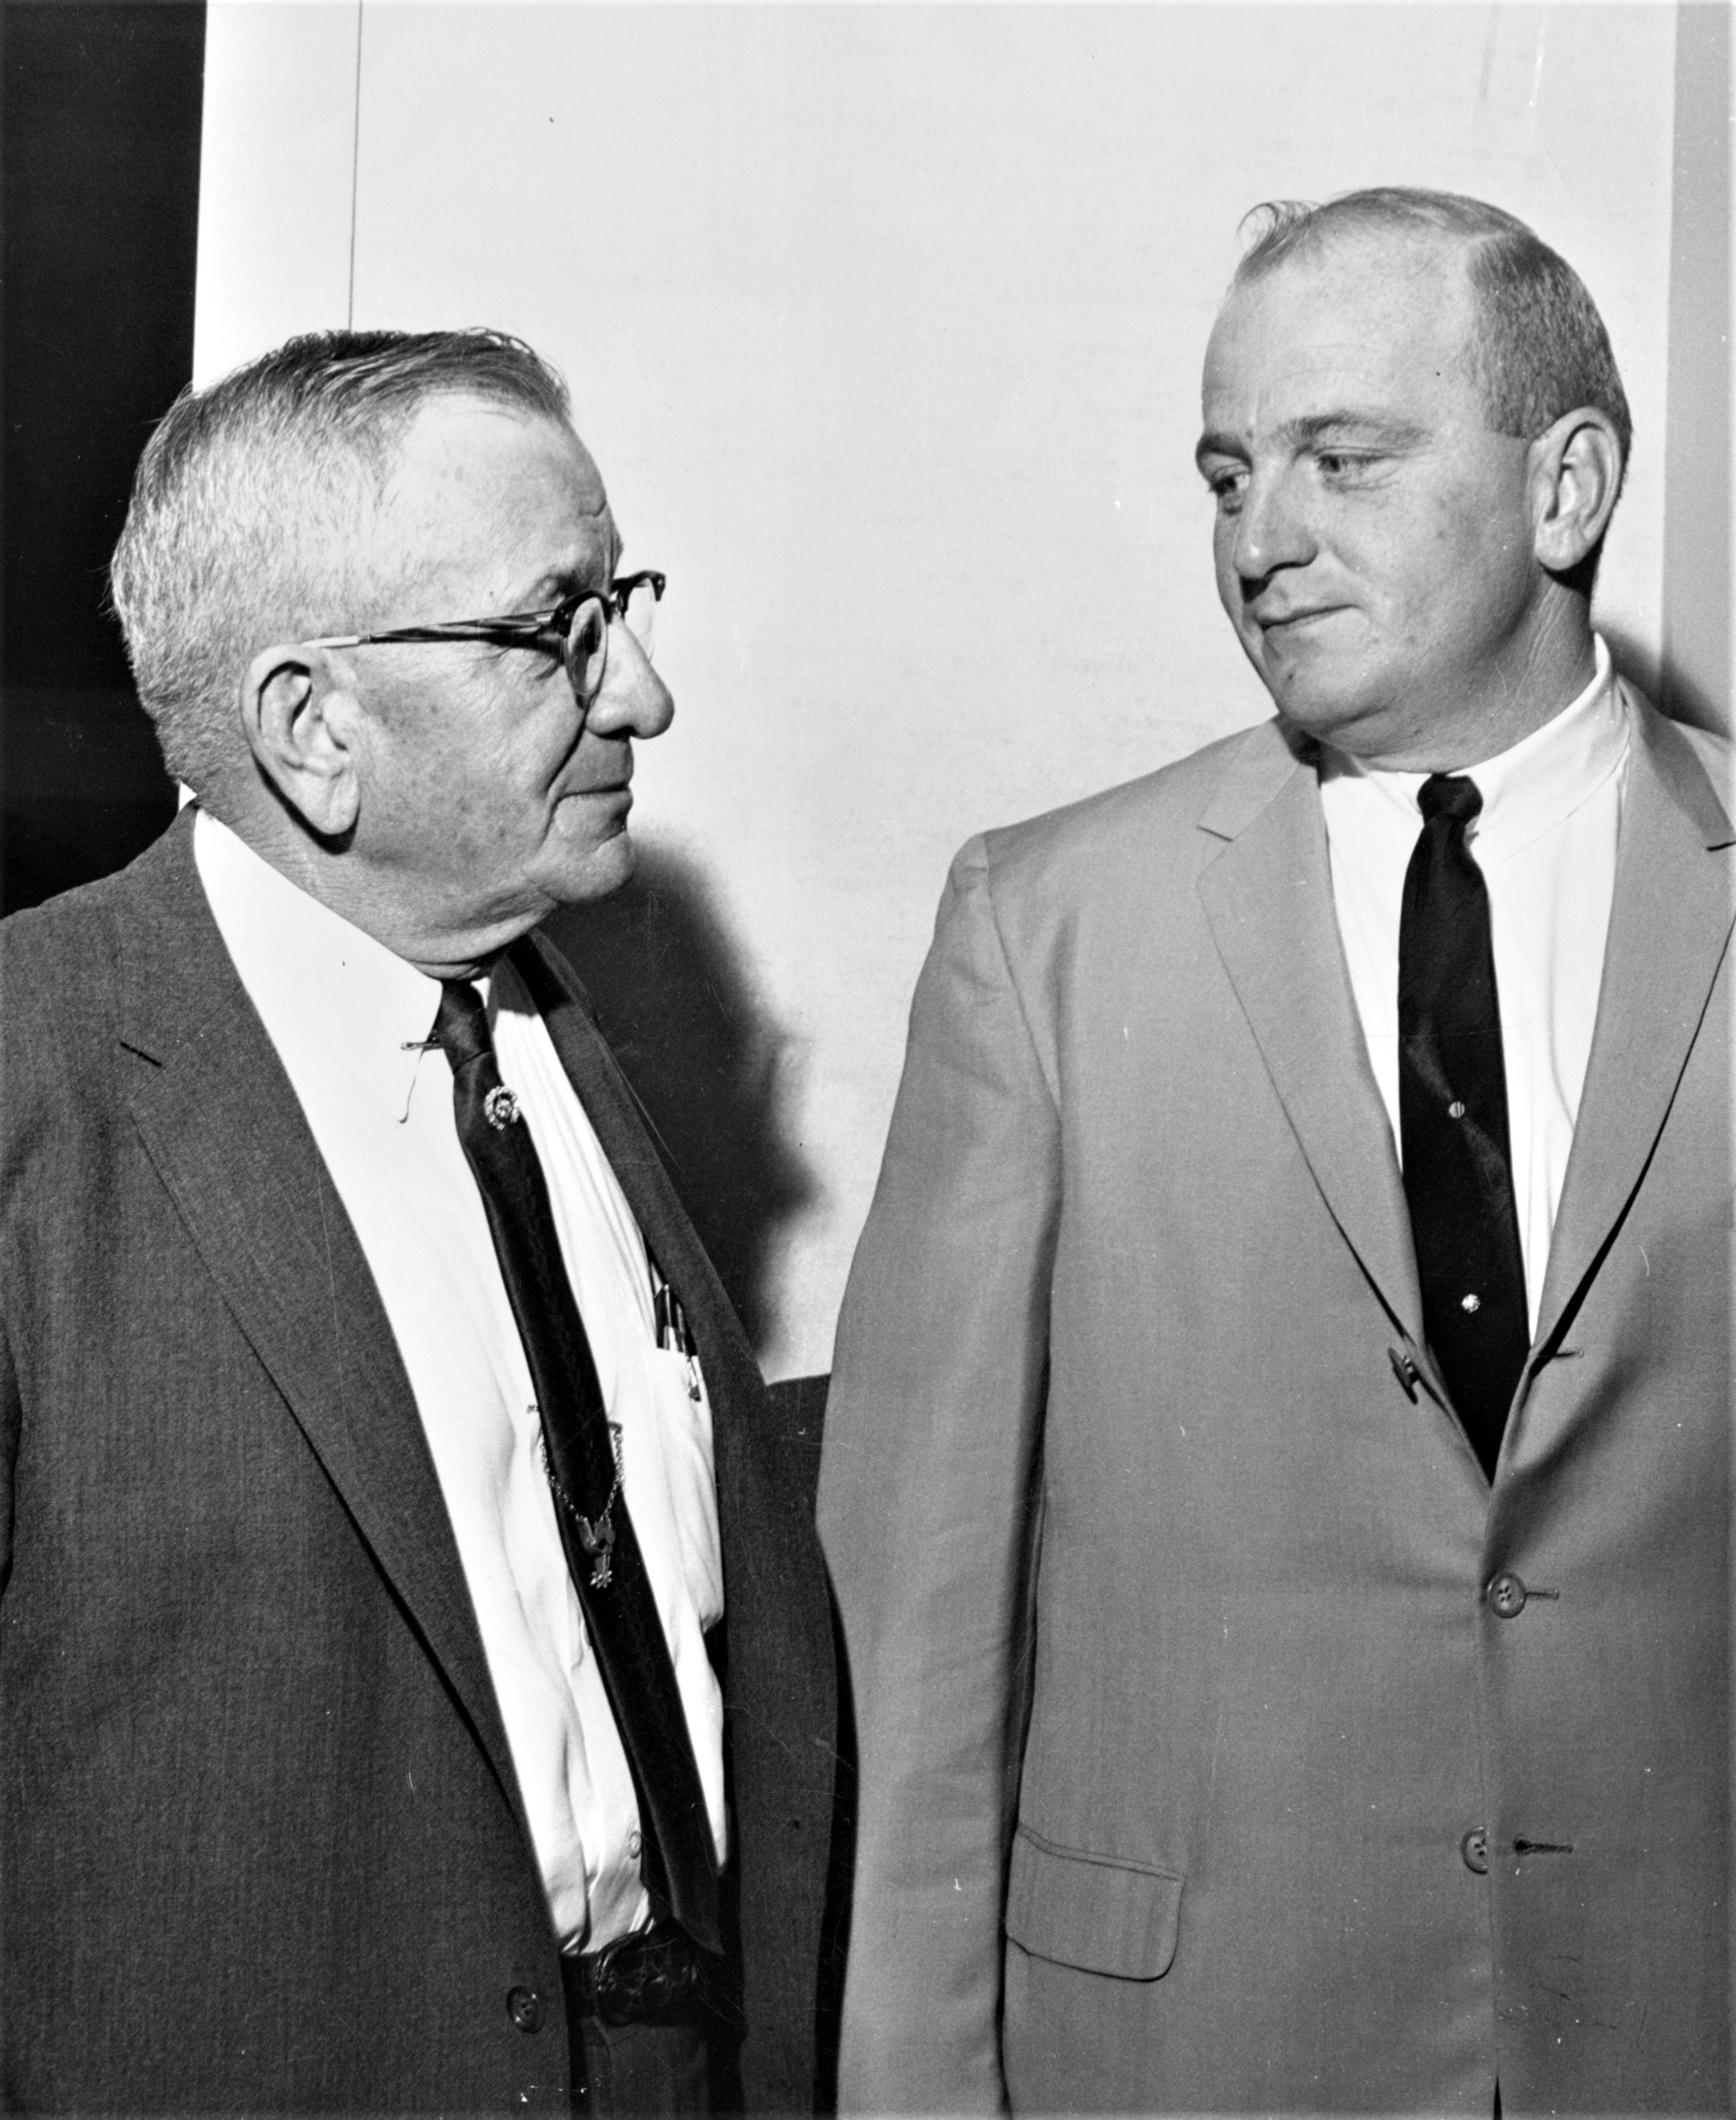 Marion Van Berg (left) and his son, Jack Van Berg, in 1965 (Keeneland Library Thoroughbred Times Collection)